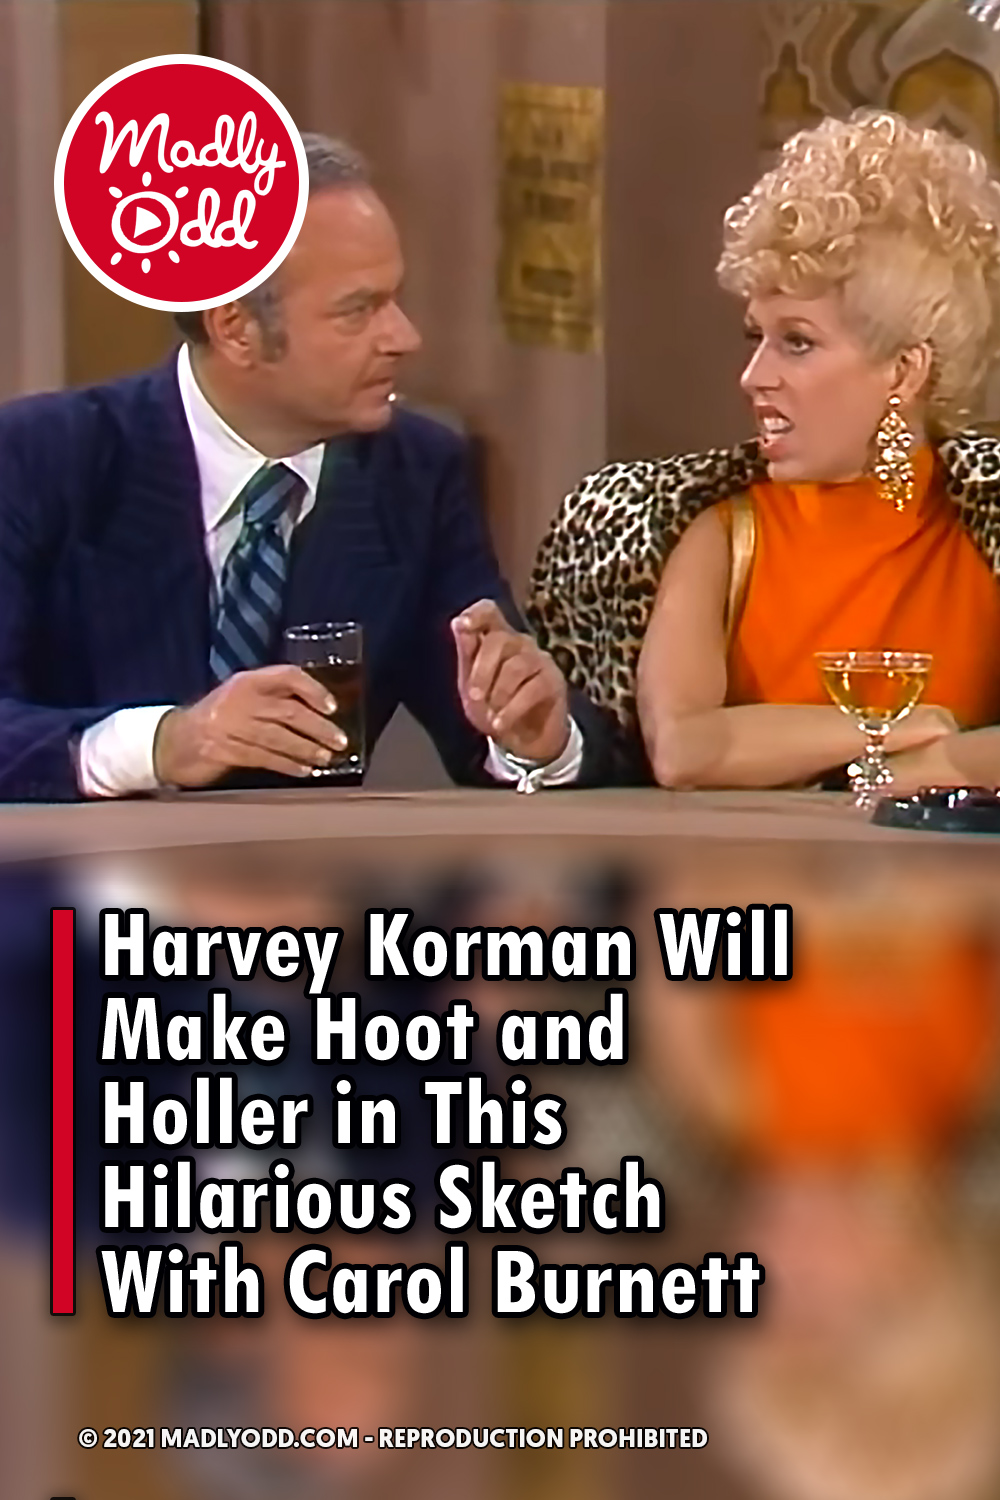 Harvey Korman Will Make Hoot and Holler in This Hilarious Sketch With Carol Burnett